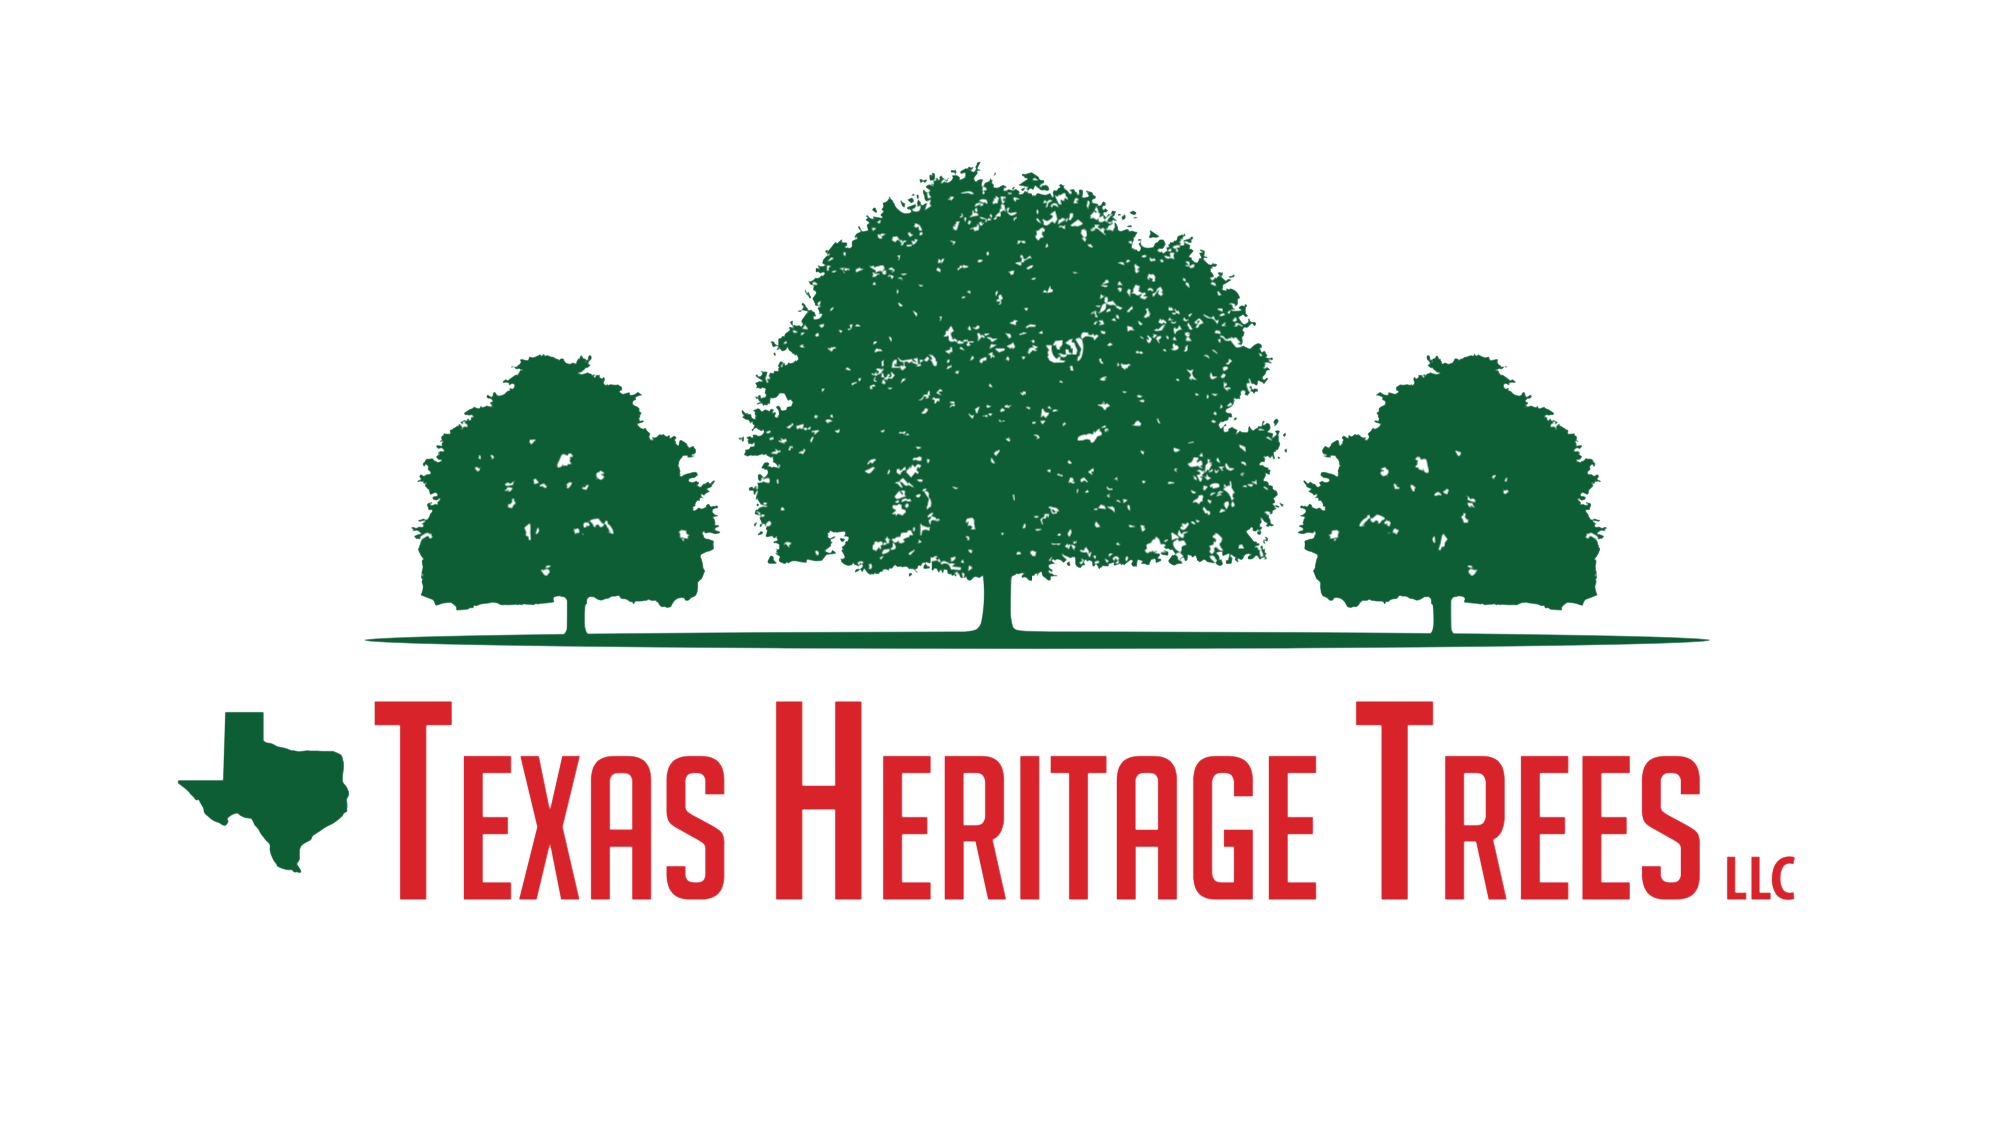 Trees Logo - Tree and Landscaping Services. Kingwood, TX. Texas Heritage Trees, LLC